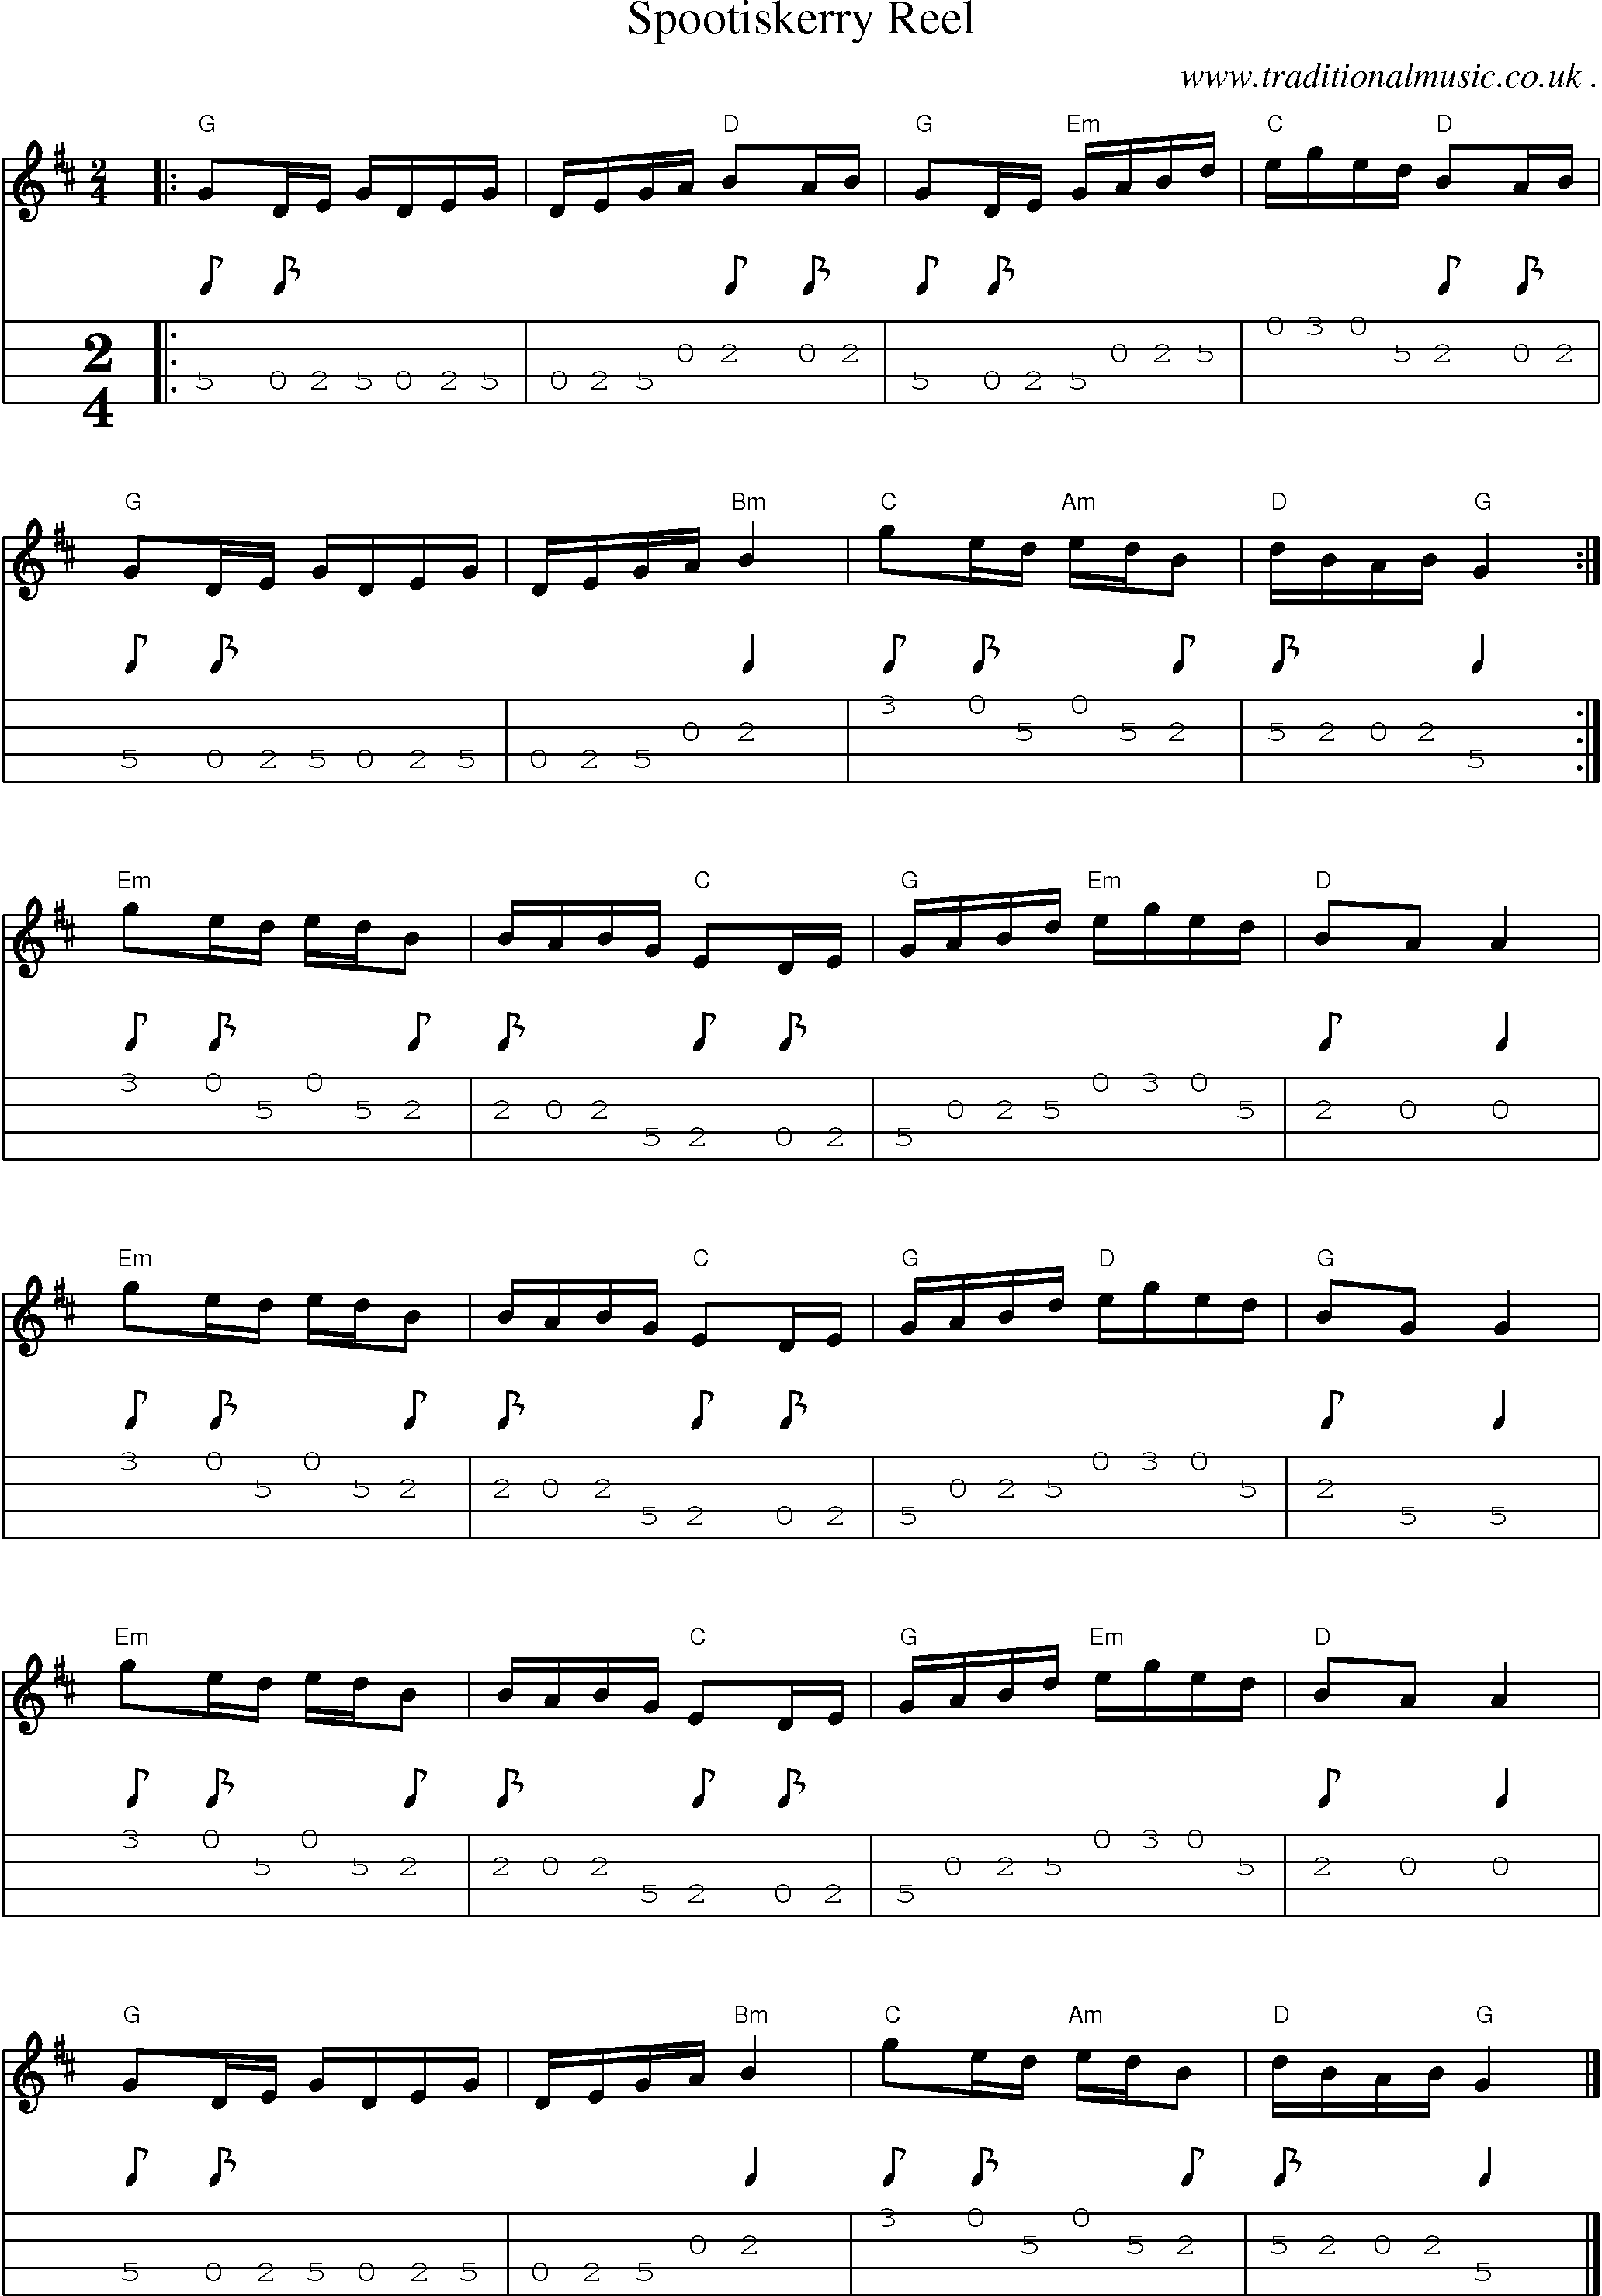 Music Score and Guitar Tabs for Spootiskerry Reel